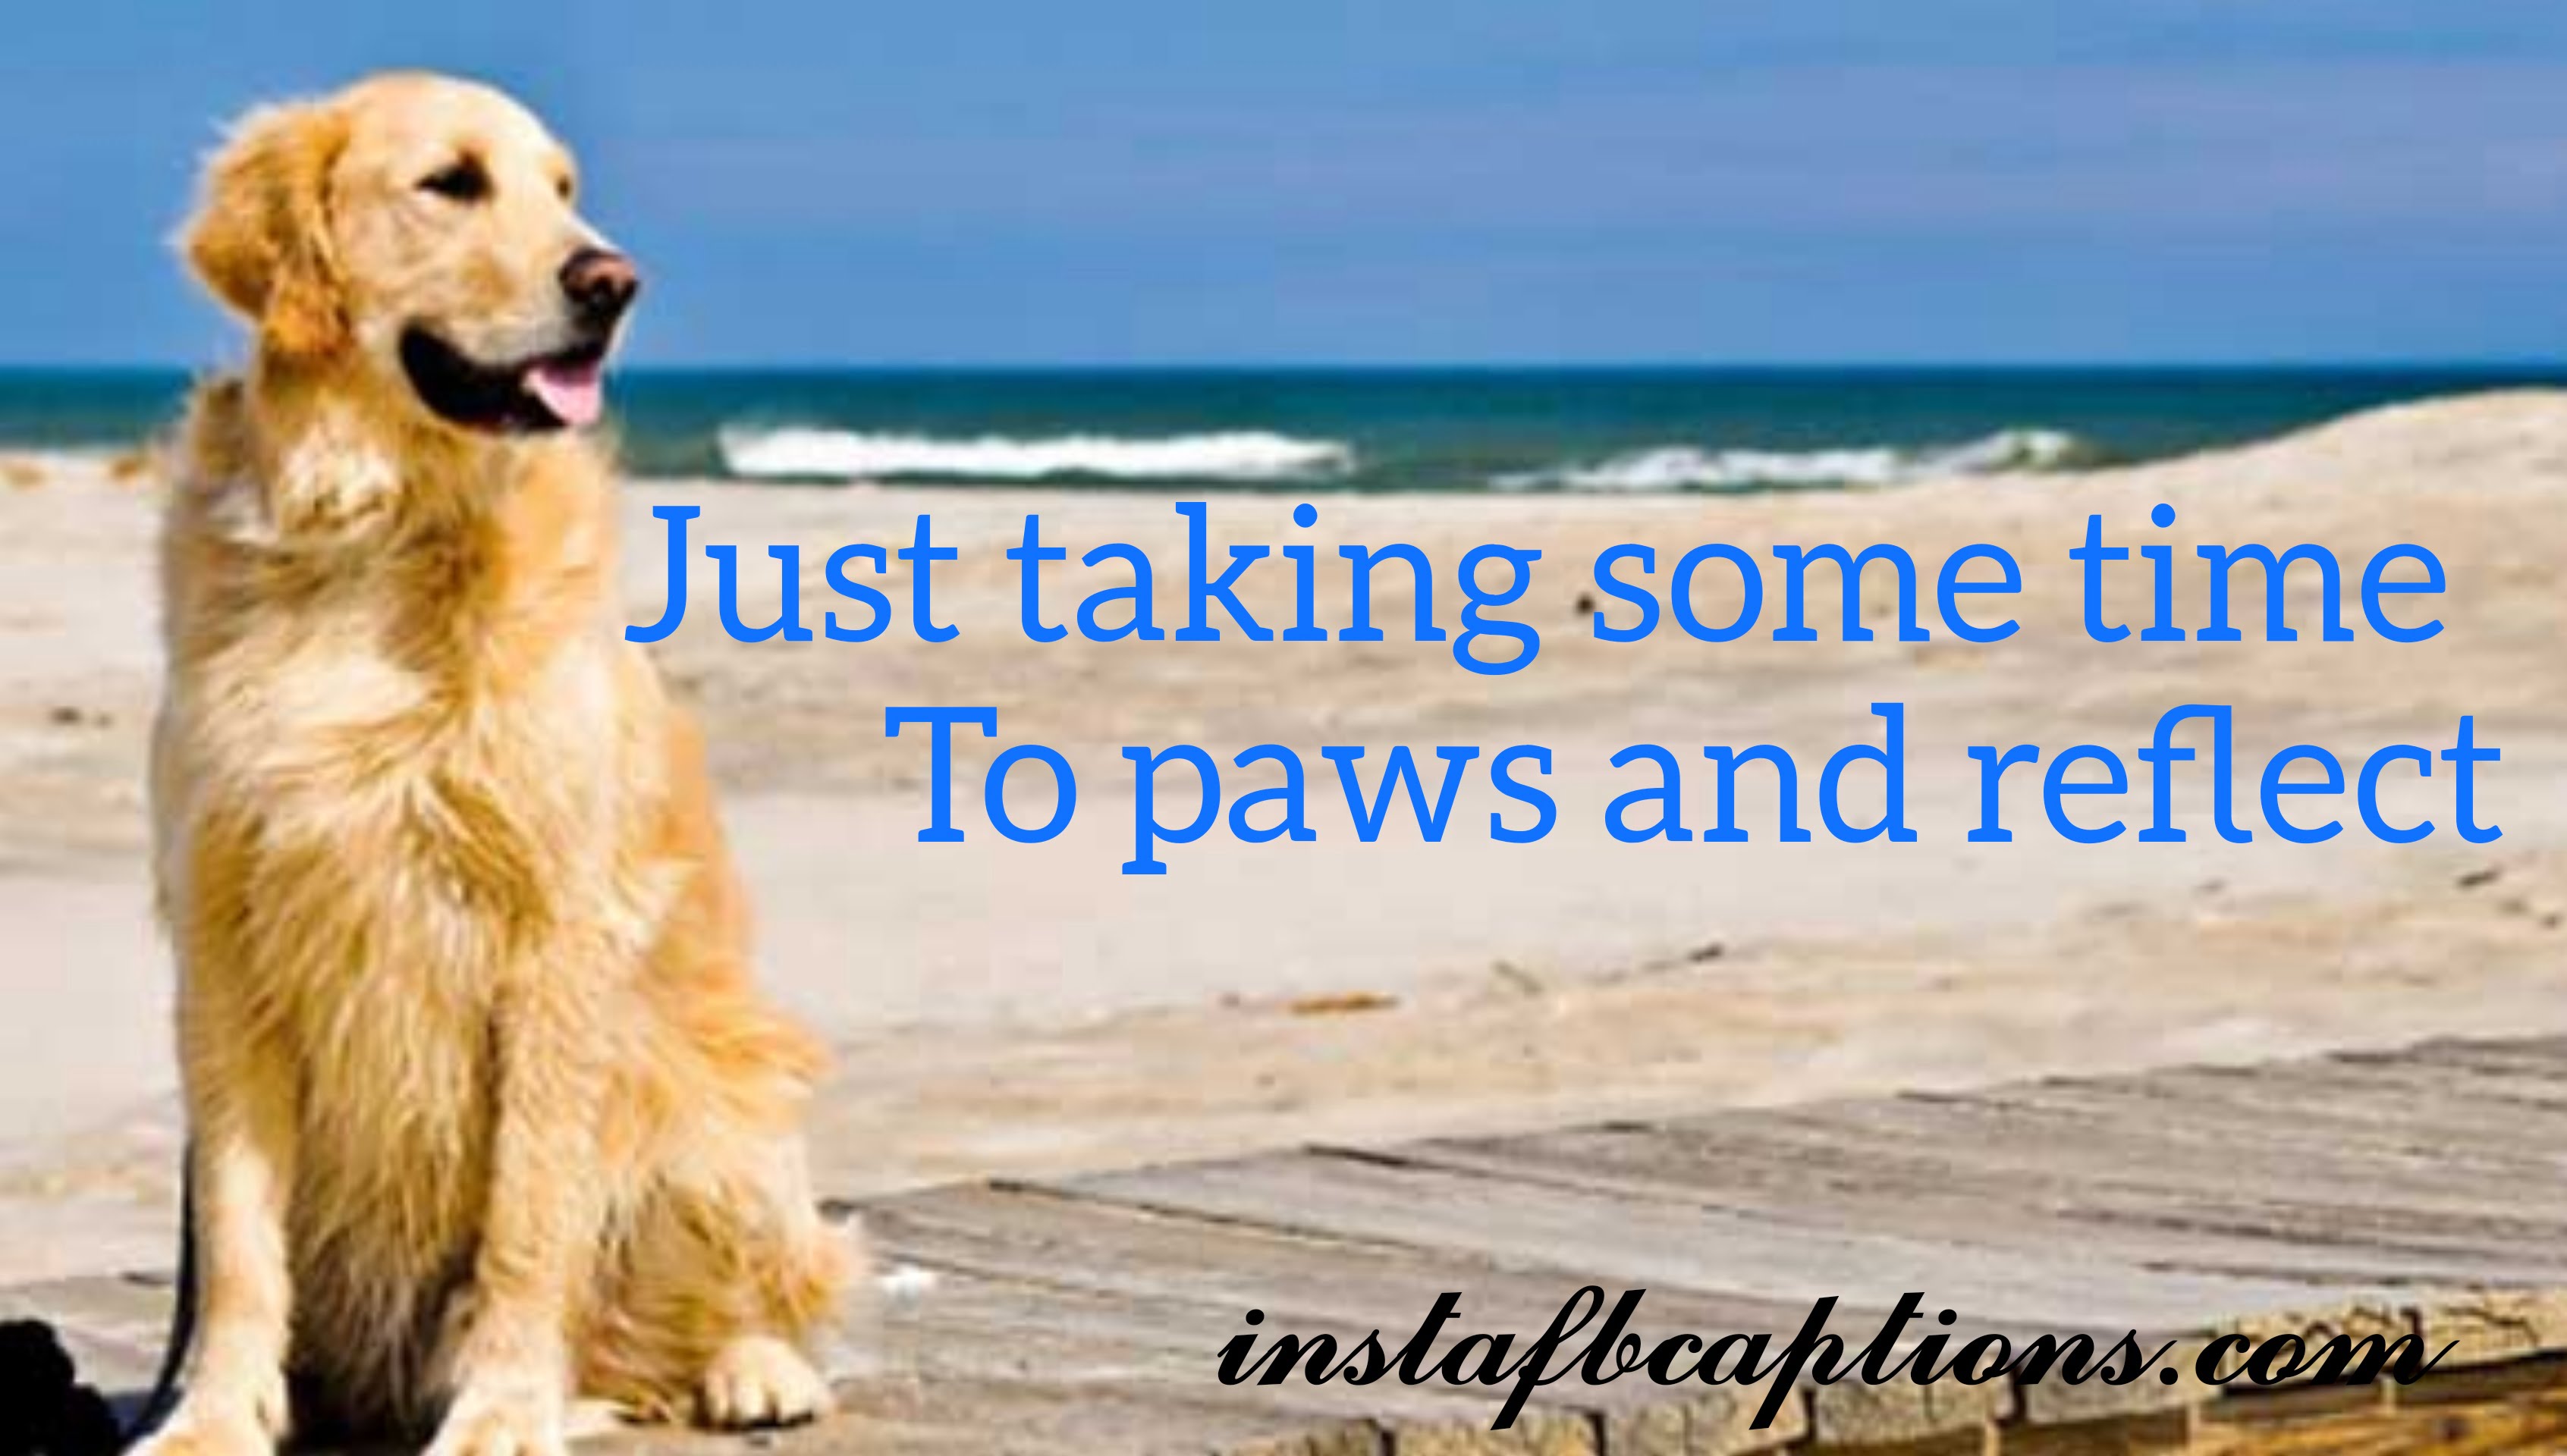 Just taking some time to paws and reflect.  - Dog on beach captions - 125+ Pawfect Instagram Captions for Puppy Lovers in 2022